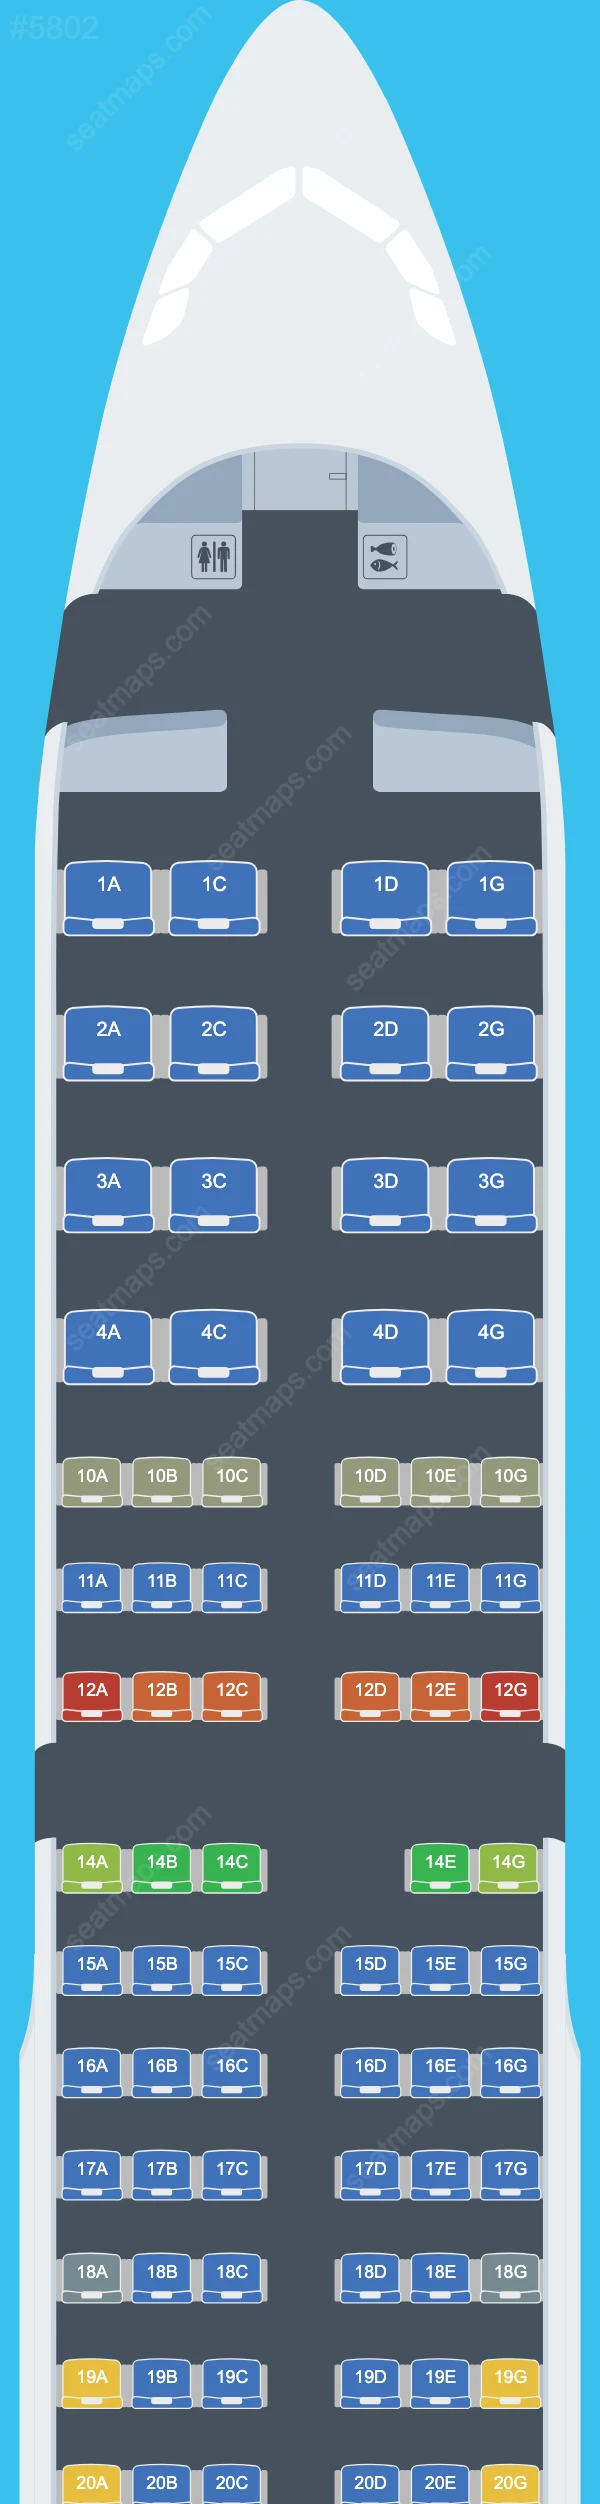 Vietnam Airlines Airbus A321 Seat Maps A321-200 V.3